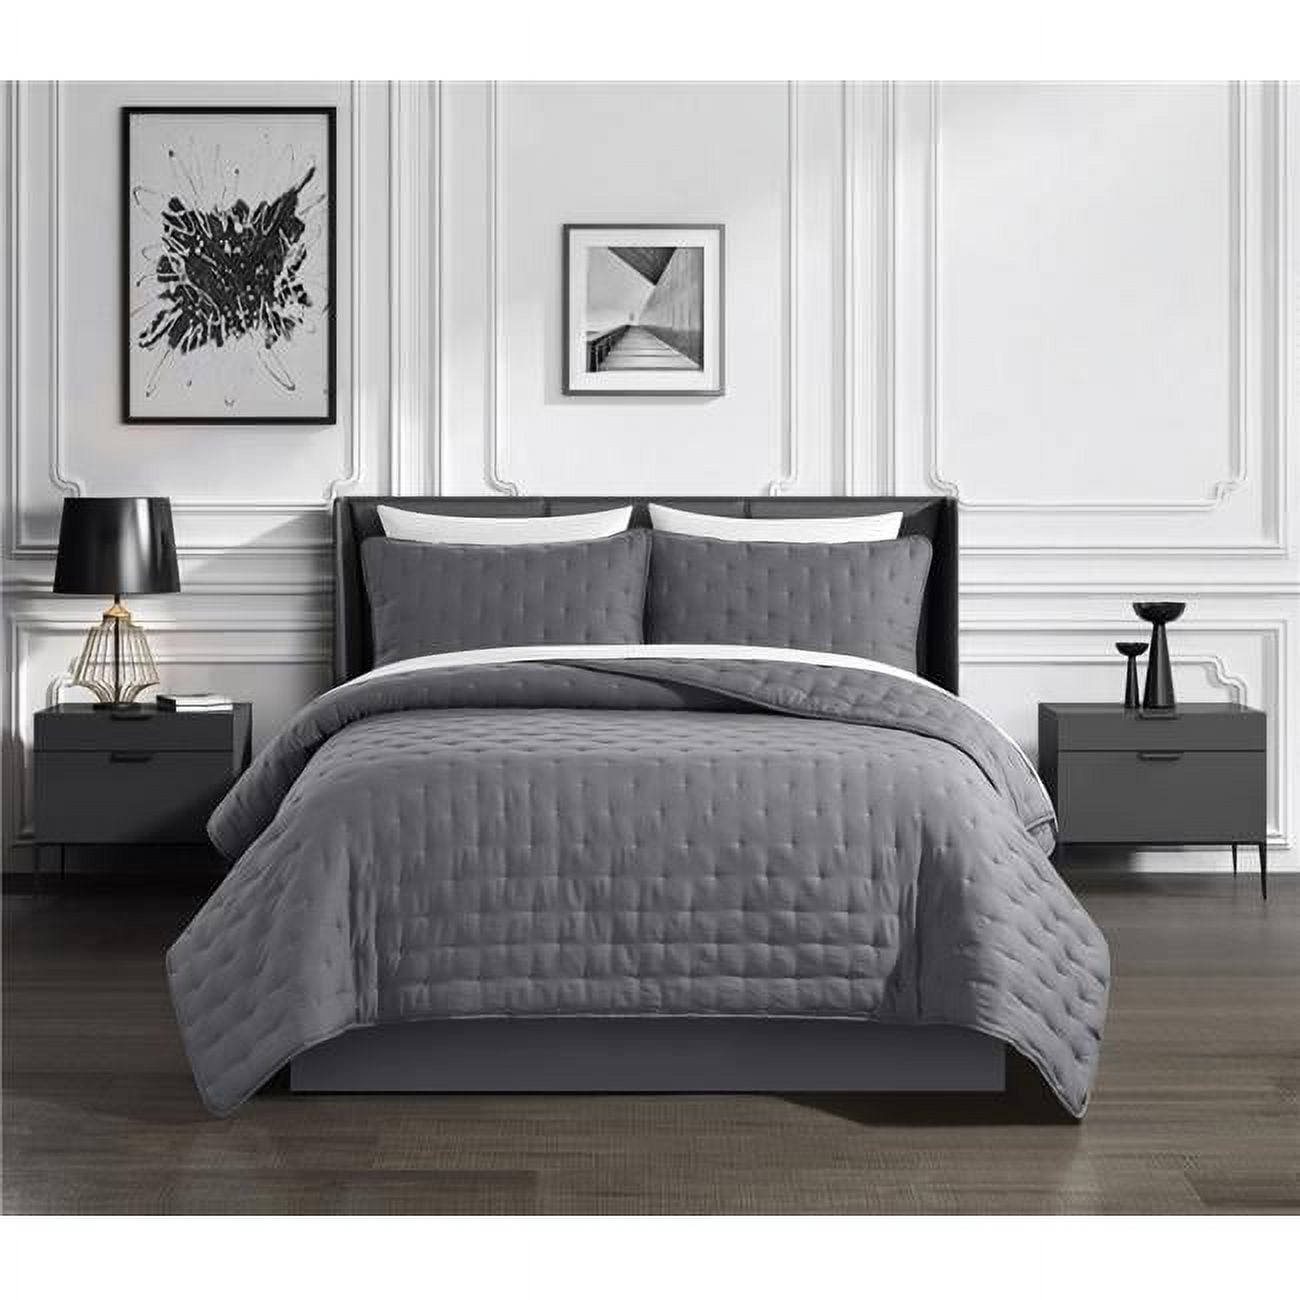 Picture of Chic Home BQS19301-US Kaceyn 3 Piece Quilt Set with Tufted Cross Stitched Design Bedding - Pillow Shams&#44; Grey - King Size